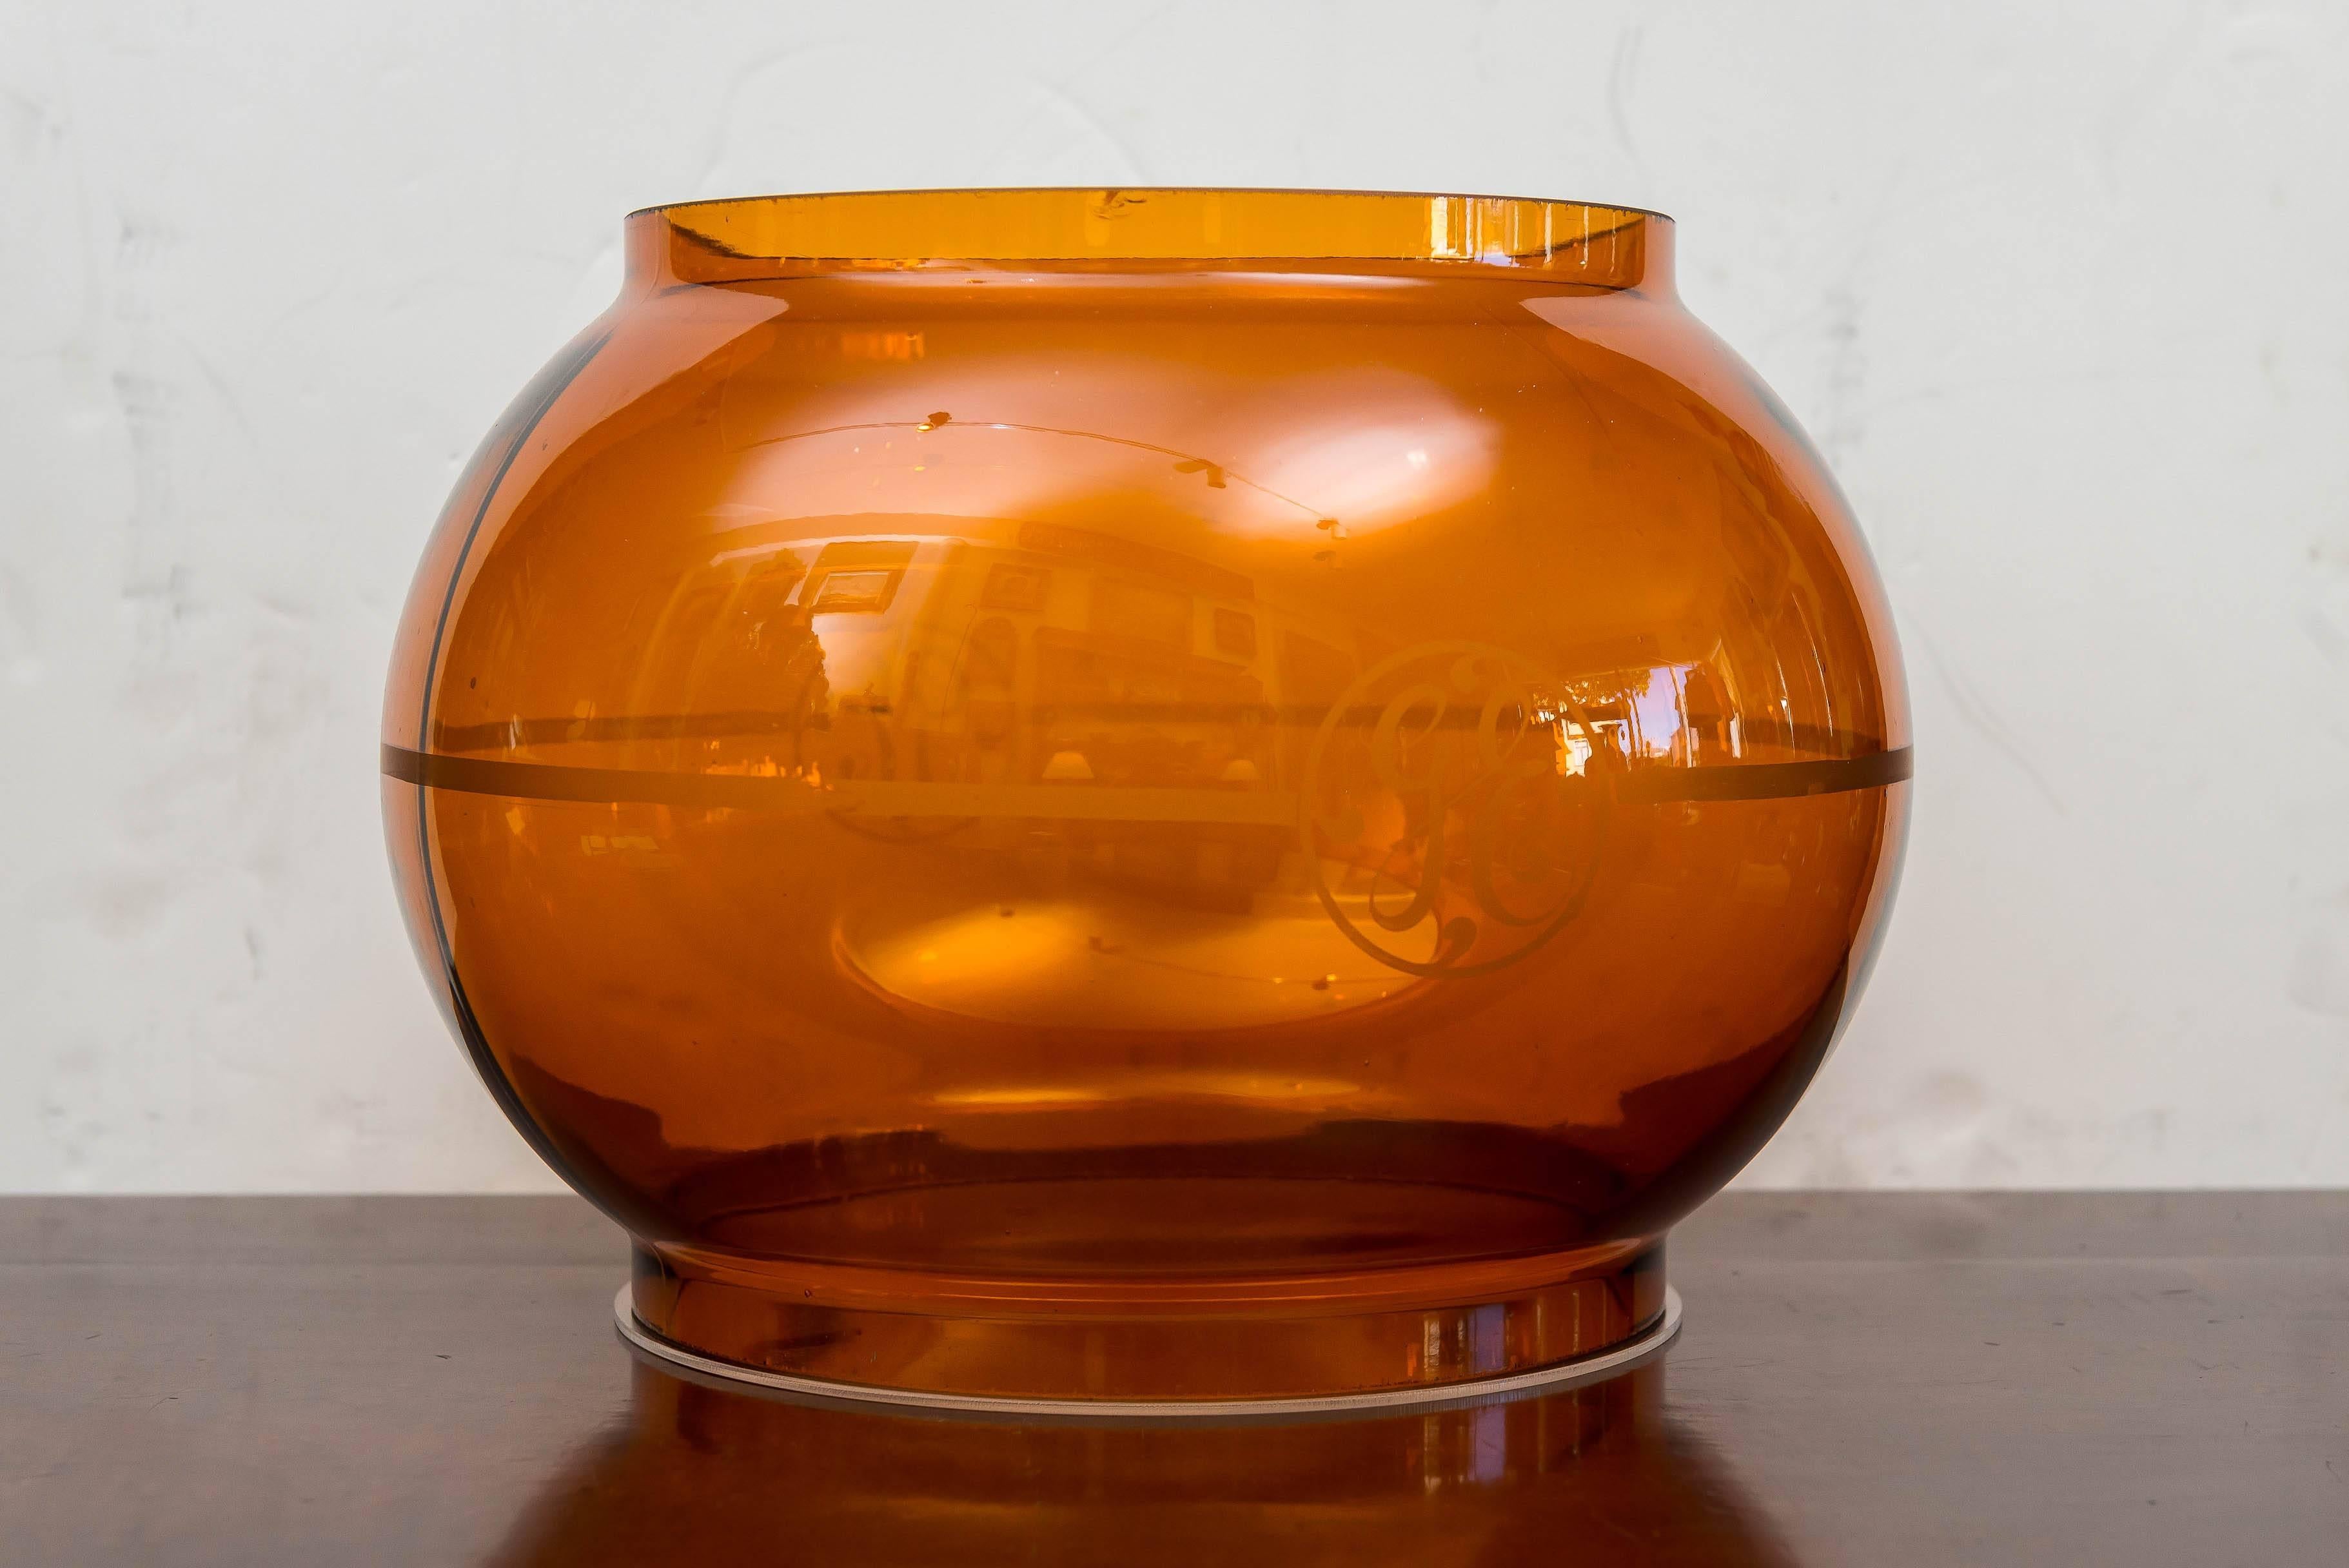 Early 20th century G E Light (Arc) diffuser globe. Like globes displayed at the 1915 Pan Pacific Exposition in San Francisco, circa 1915. Acid etched G E (General Electric) logo on two sides with a meridian ring. Heavy blown glass with ground edges